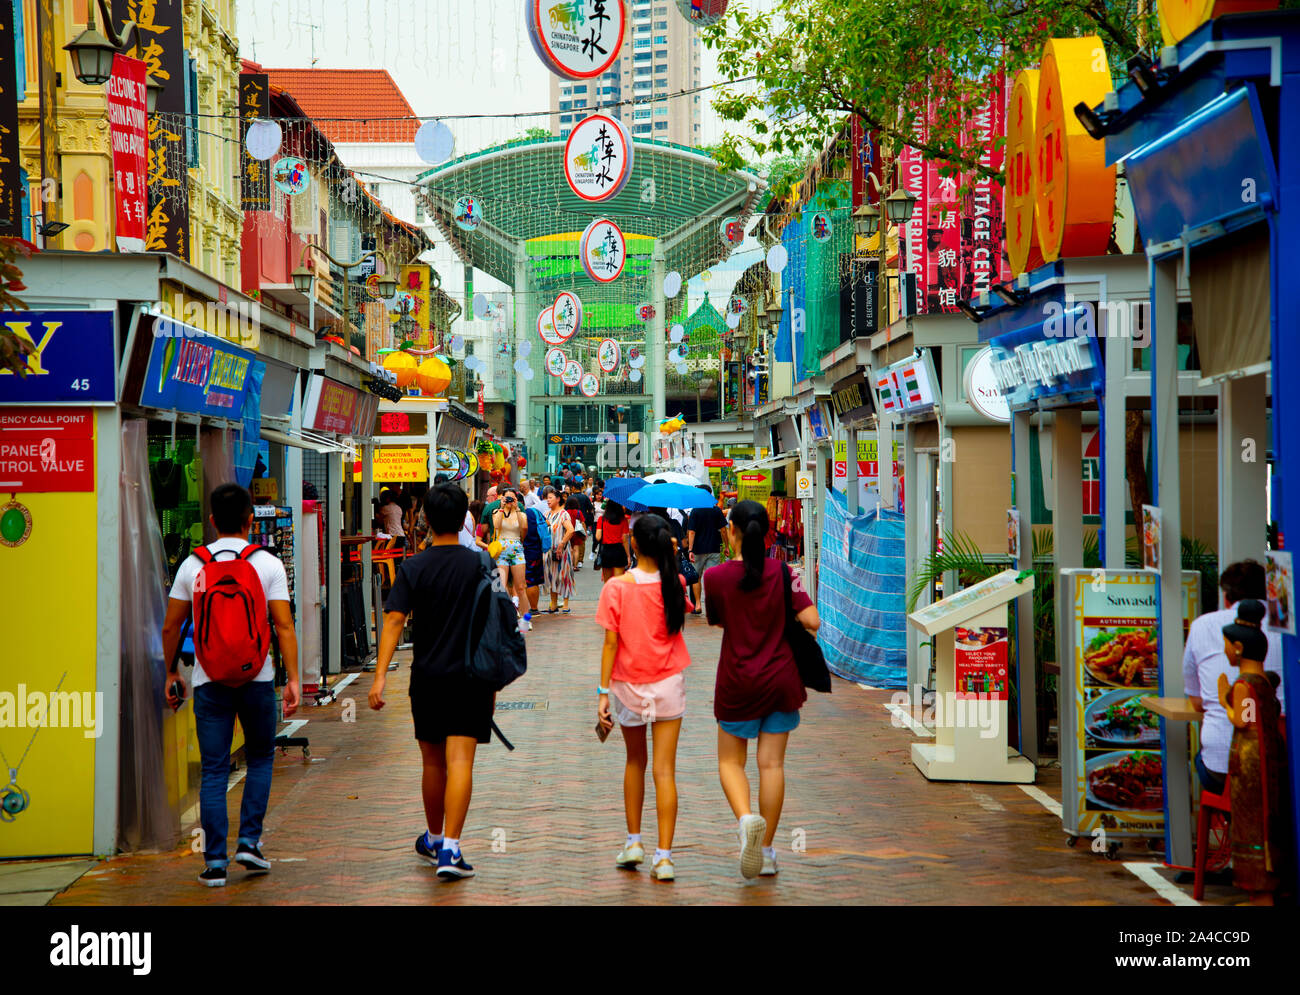 SINGAPORE CITY, SINGAPORE - April 11, 2019: Colorful street in Chinatown district Stock Photo